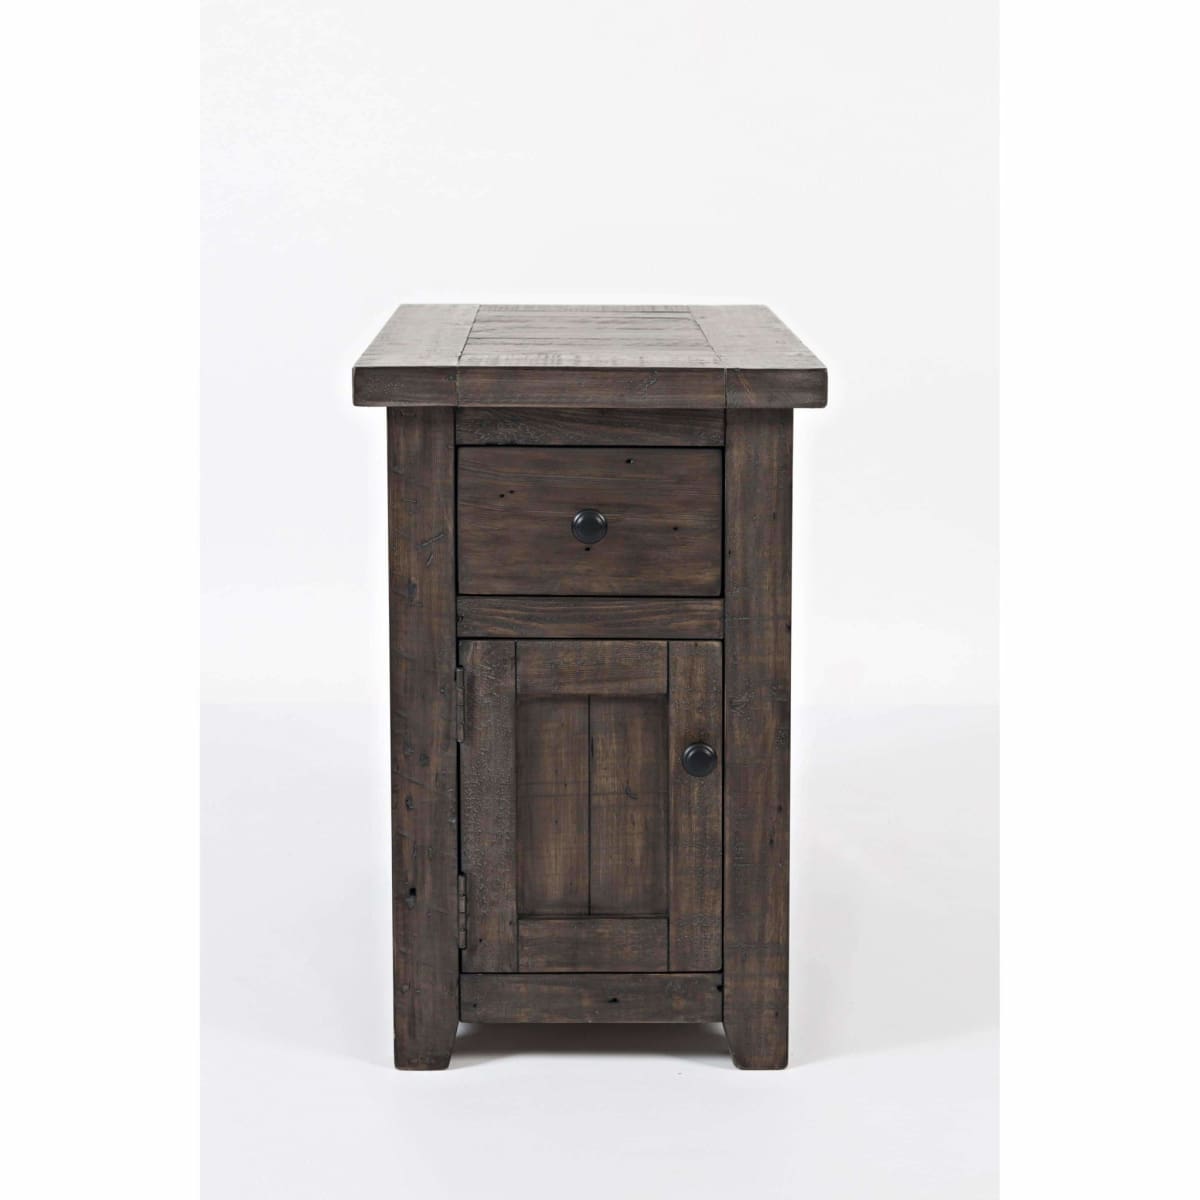 Madison County Chairside Table - END TABLE/SIDE TABLE